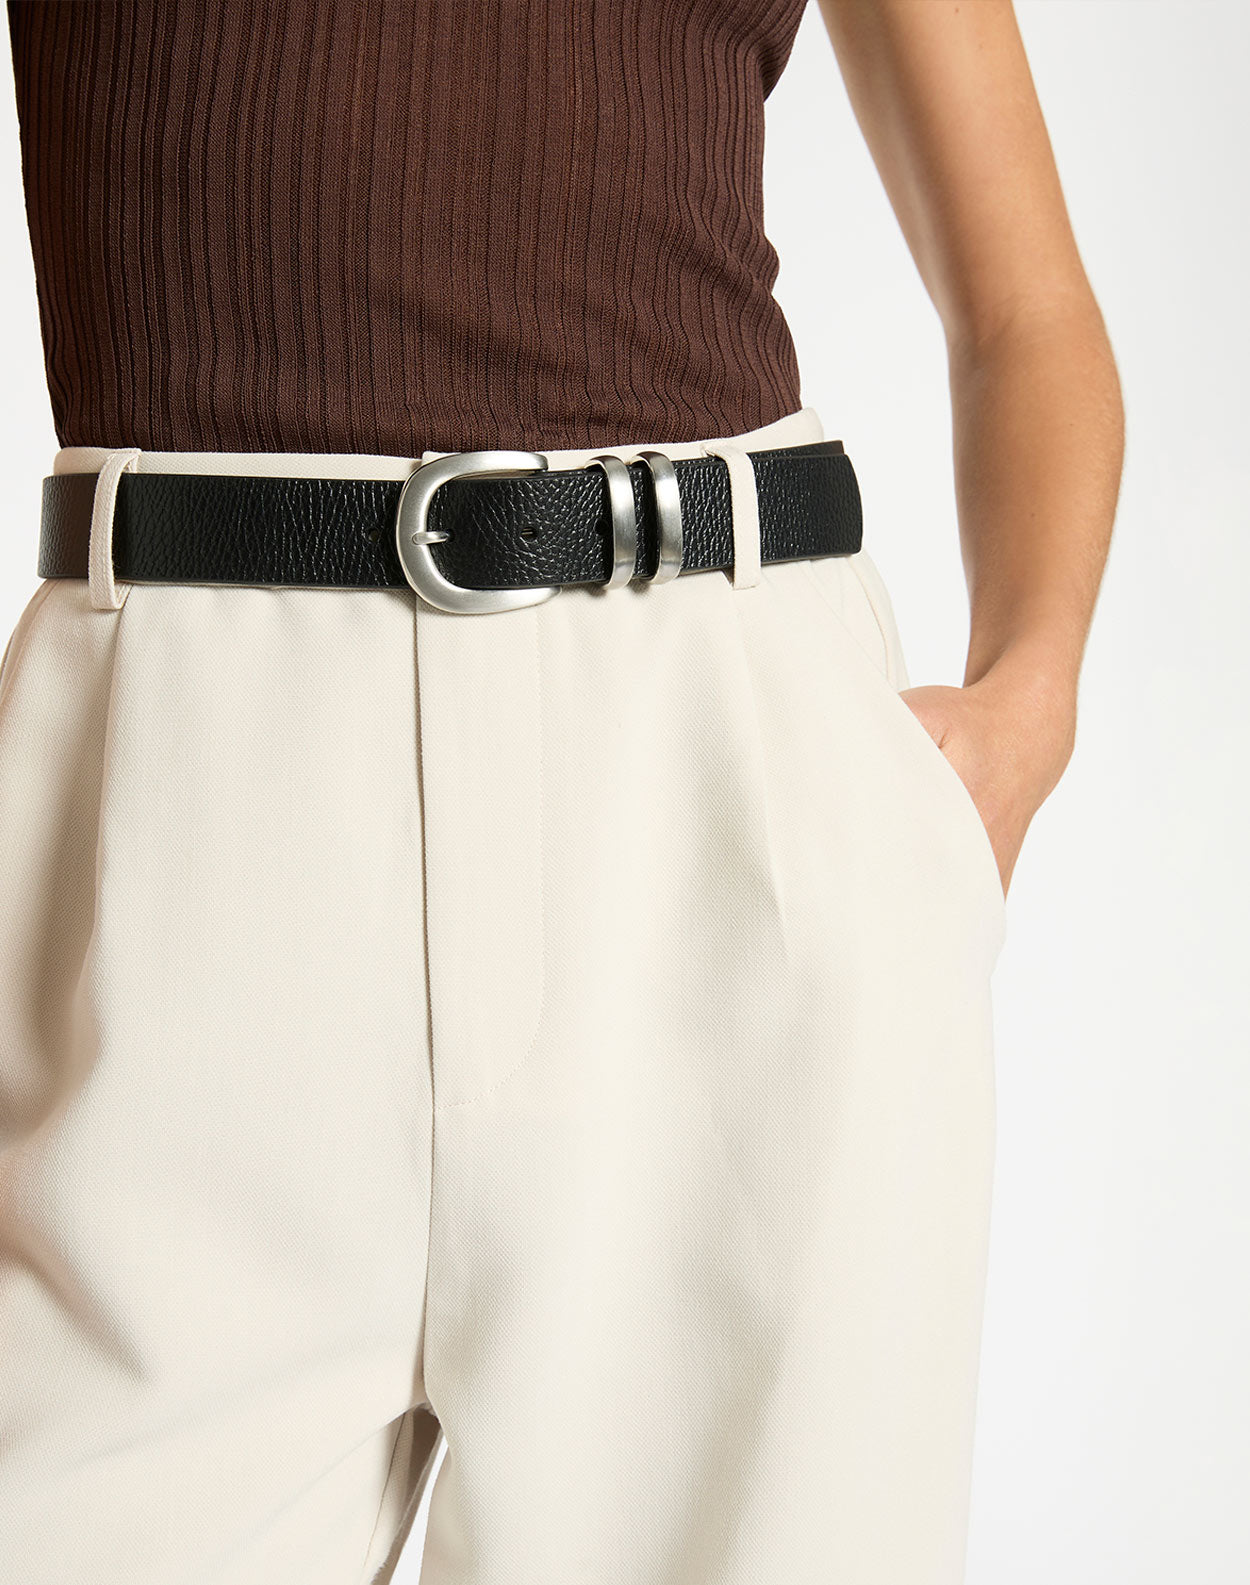 Status Anxiety Let It Be Women's Leather Belt